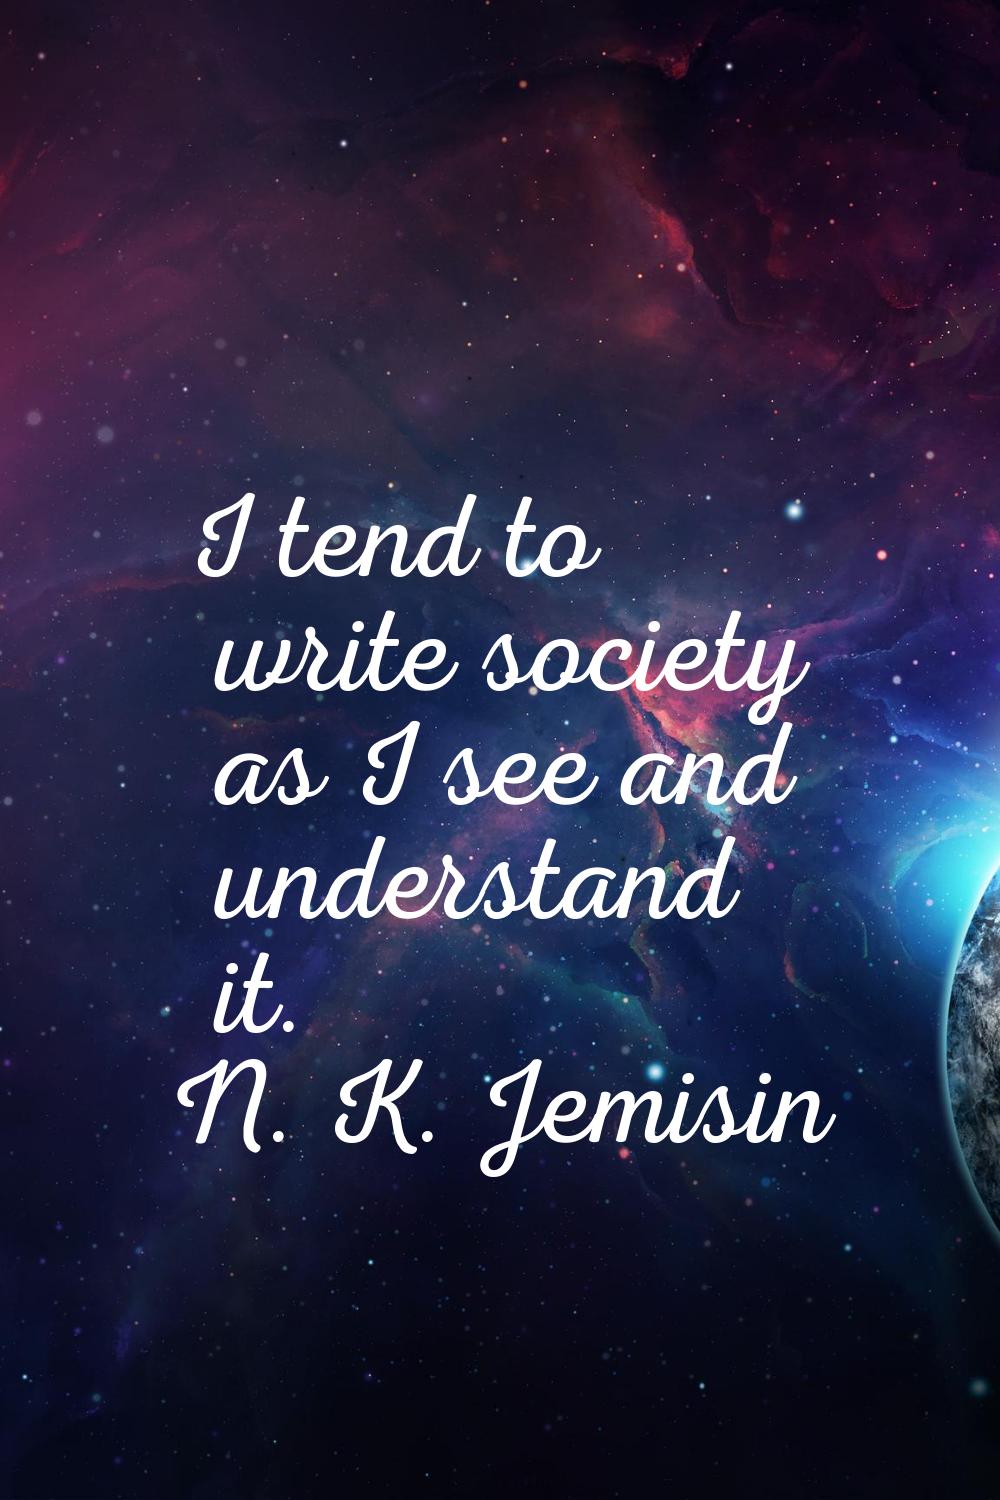 I tend to write society as I see and understand it.